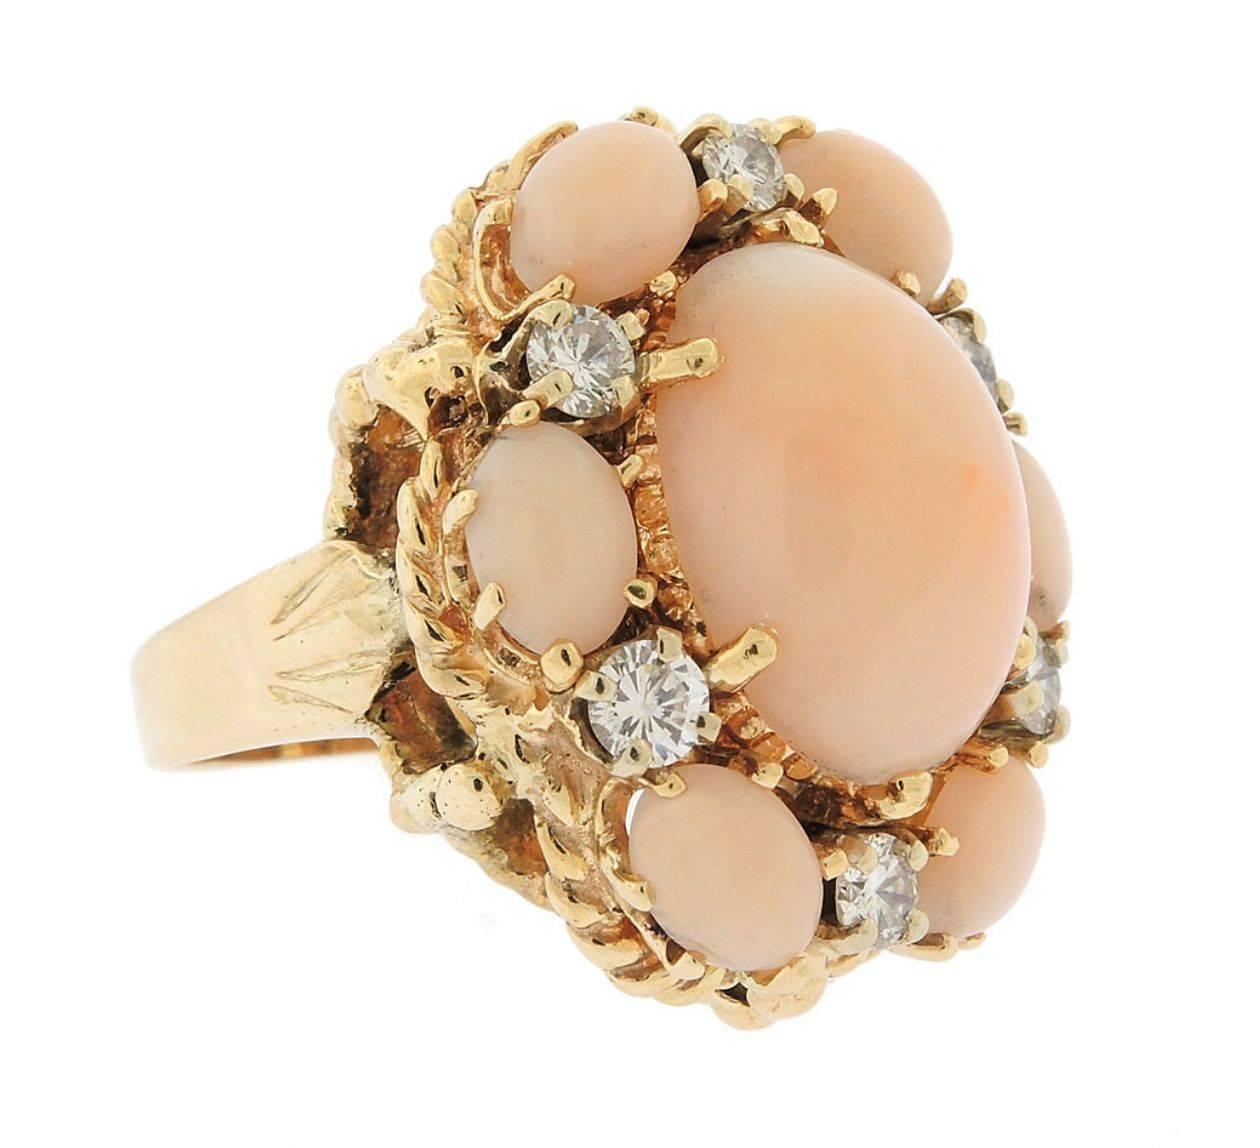 Striking pale pink and peach angel skin coral statement ring.  A central angel skin coral cabochon is set with beautiful round-cut 0.50 carats of diamonds and a cabochon coral surround.  Lovely rope textured 14k gold on the high polish band.  The